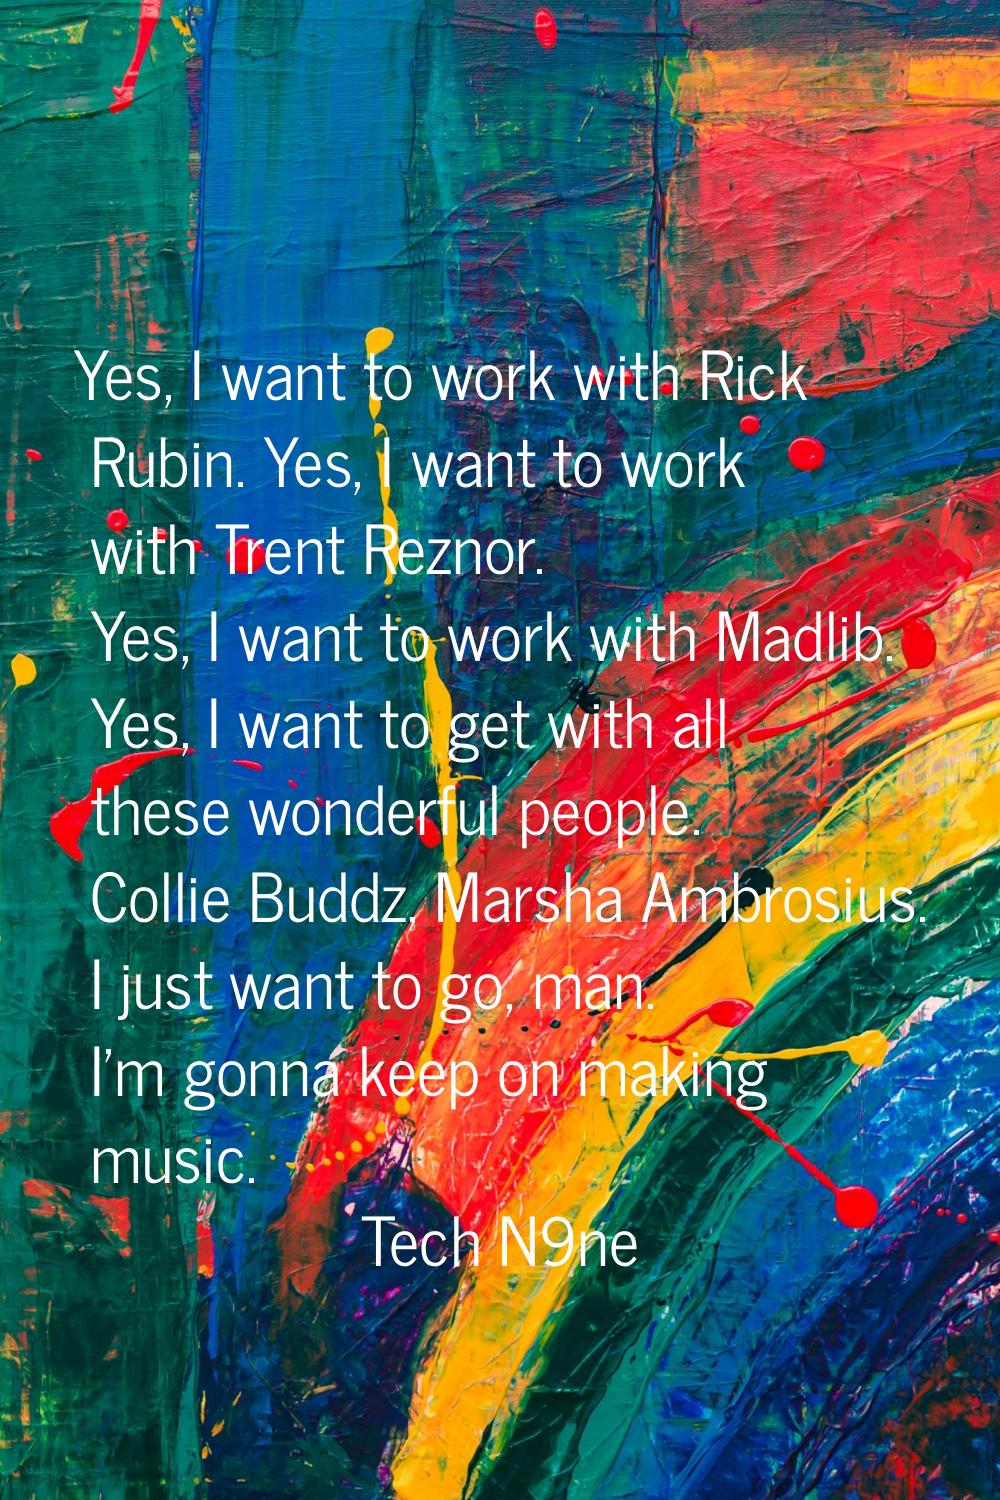 Yes, I want to work with Rick Rubin. Yes, I want to work with Trent Reznor. Yes, I want to work wit